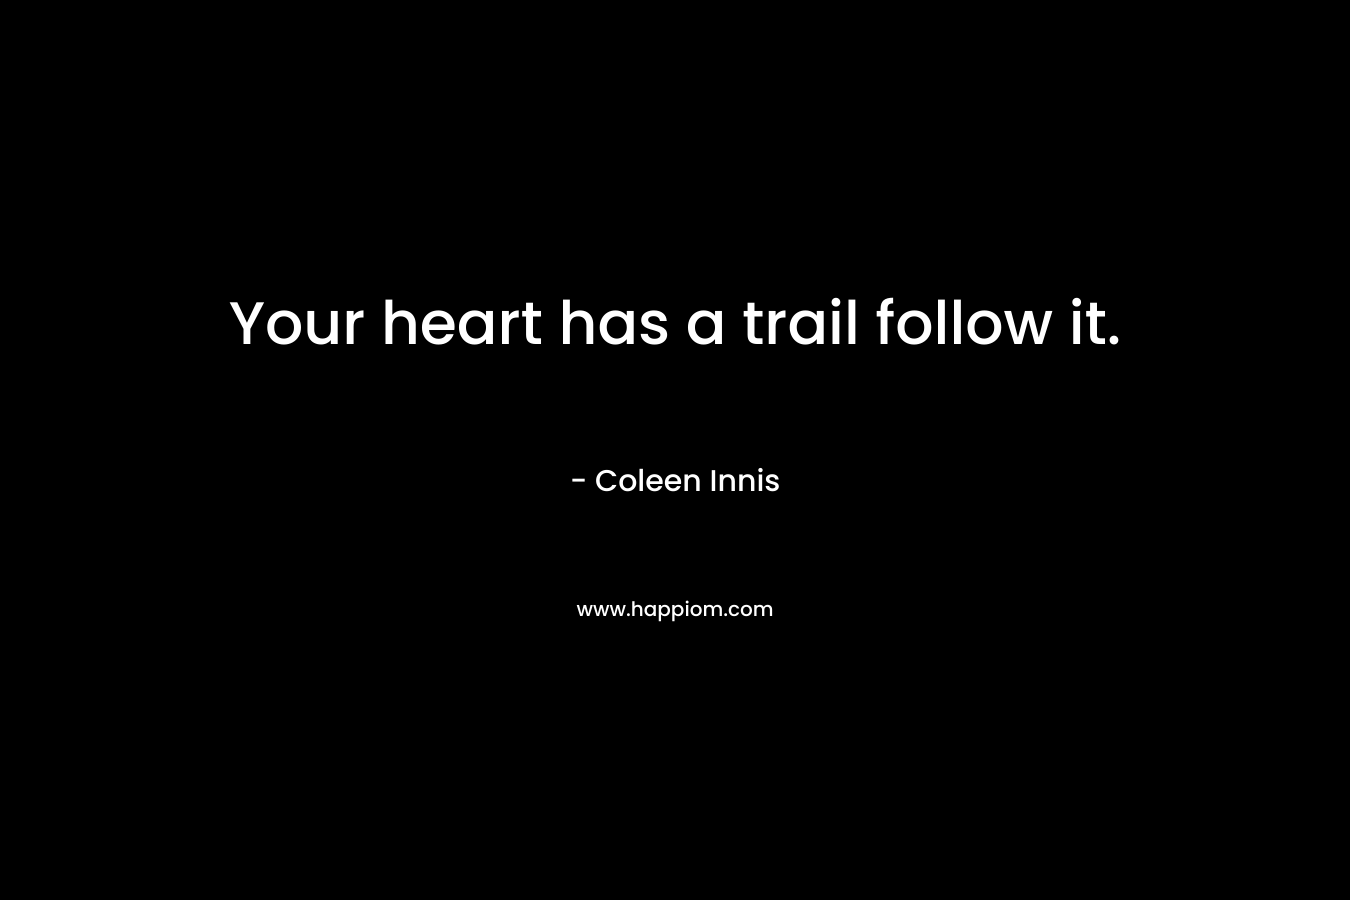 Your heart has a trail follow it.